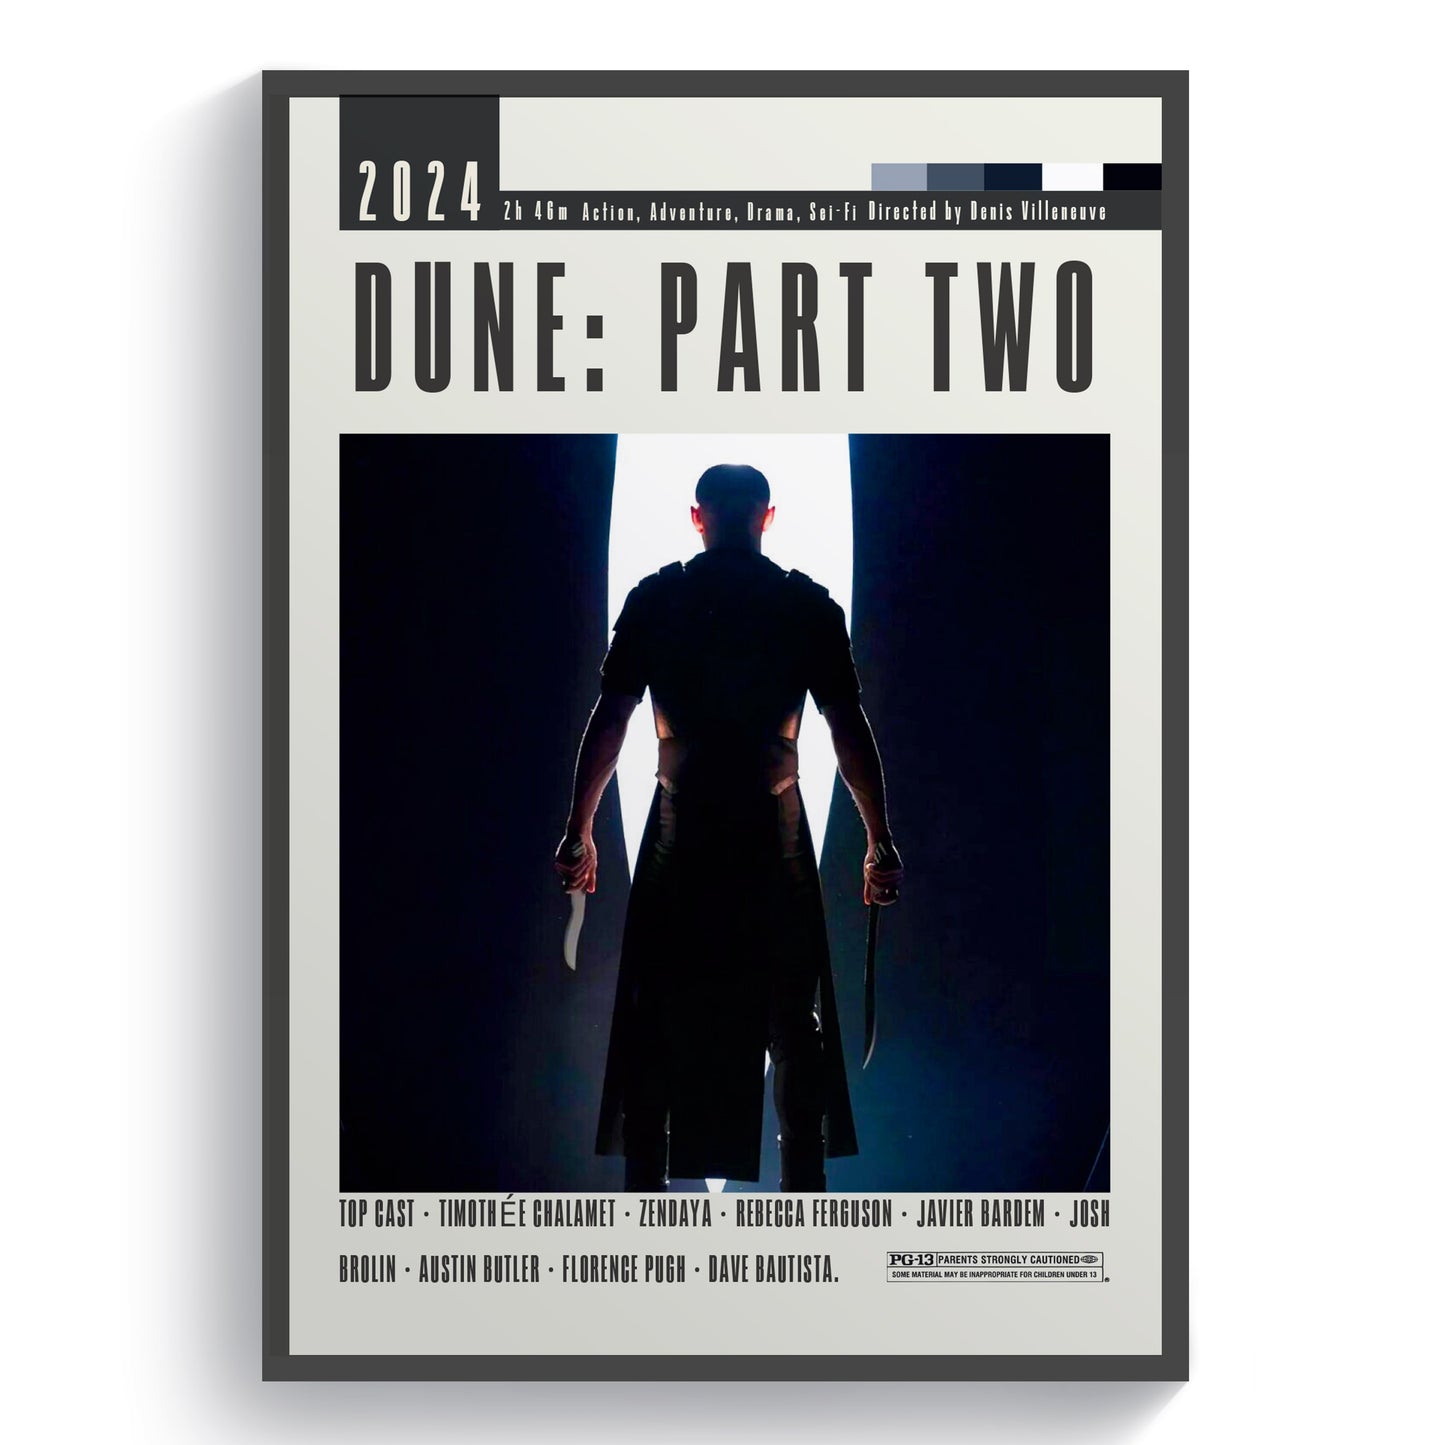 Discover the stunning world of DUNE with our PART 2 movie posters. Featuring intricate designs and captivating visuals, these posters are a must-have for any fan. Showcase your love for the franchise and bring the epic story to life with these high-quality prints. Own a piece of the DUNE universe today!